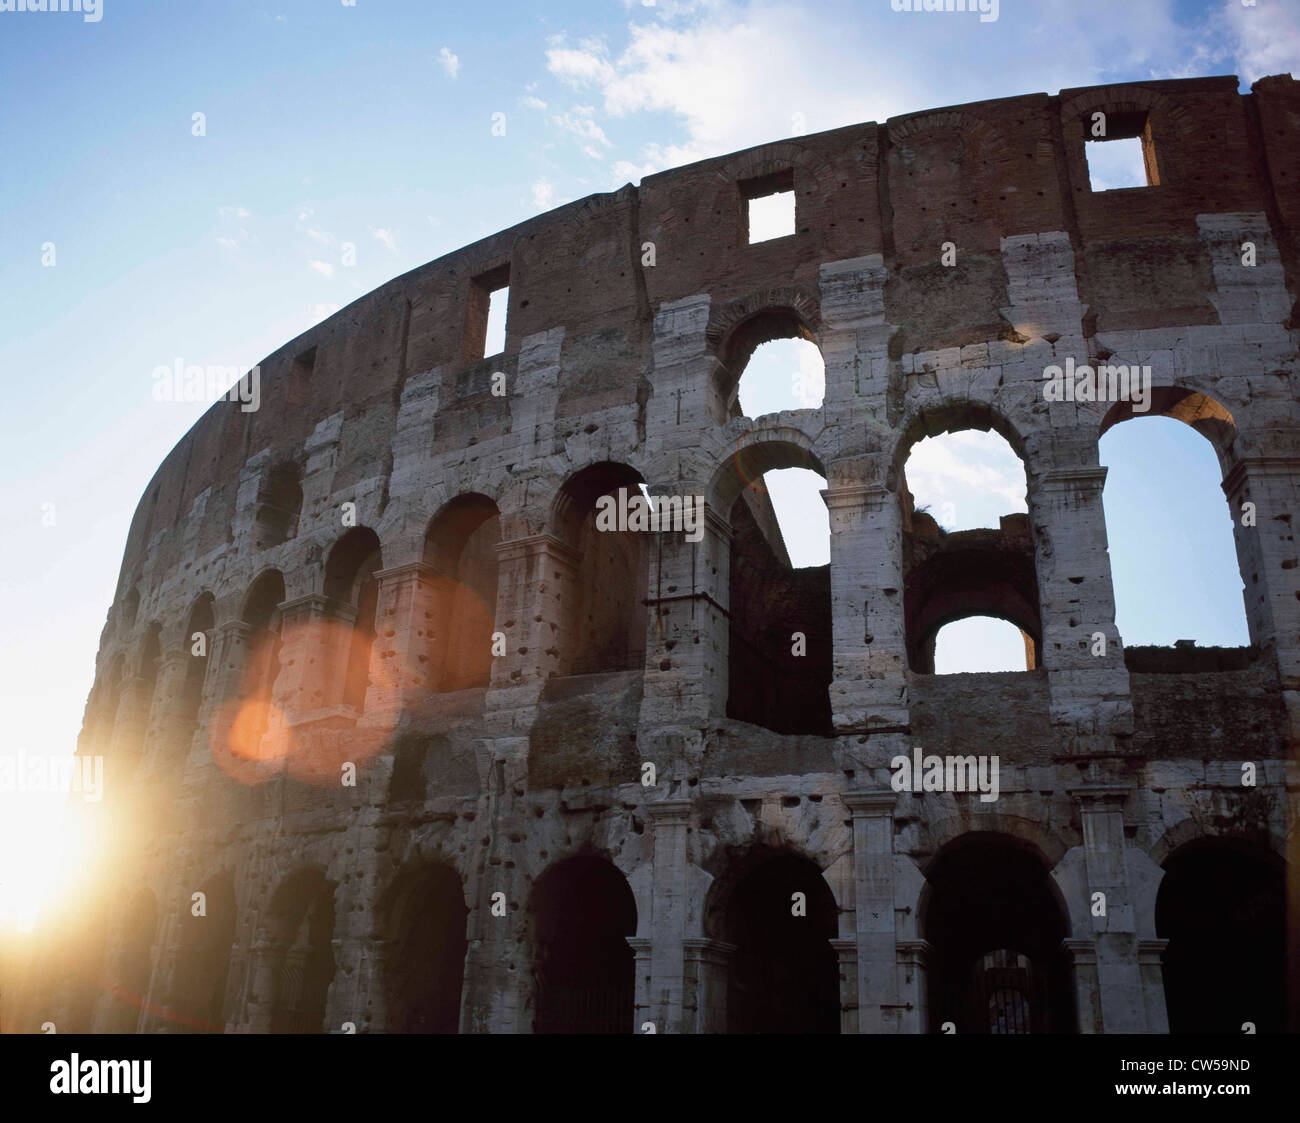 Low angle view of the old ruins of an amphitheater, Colosseum, Rome, Italy Stock Photo